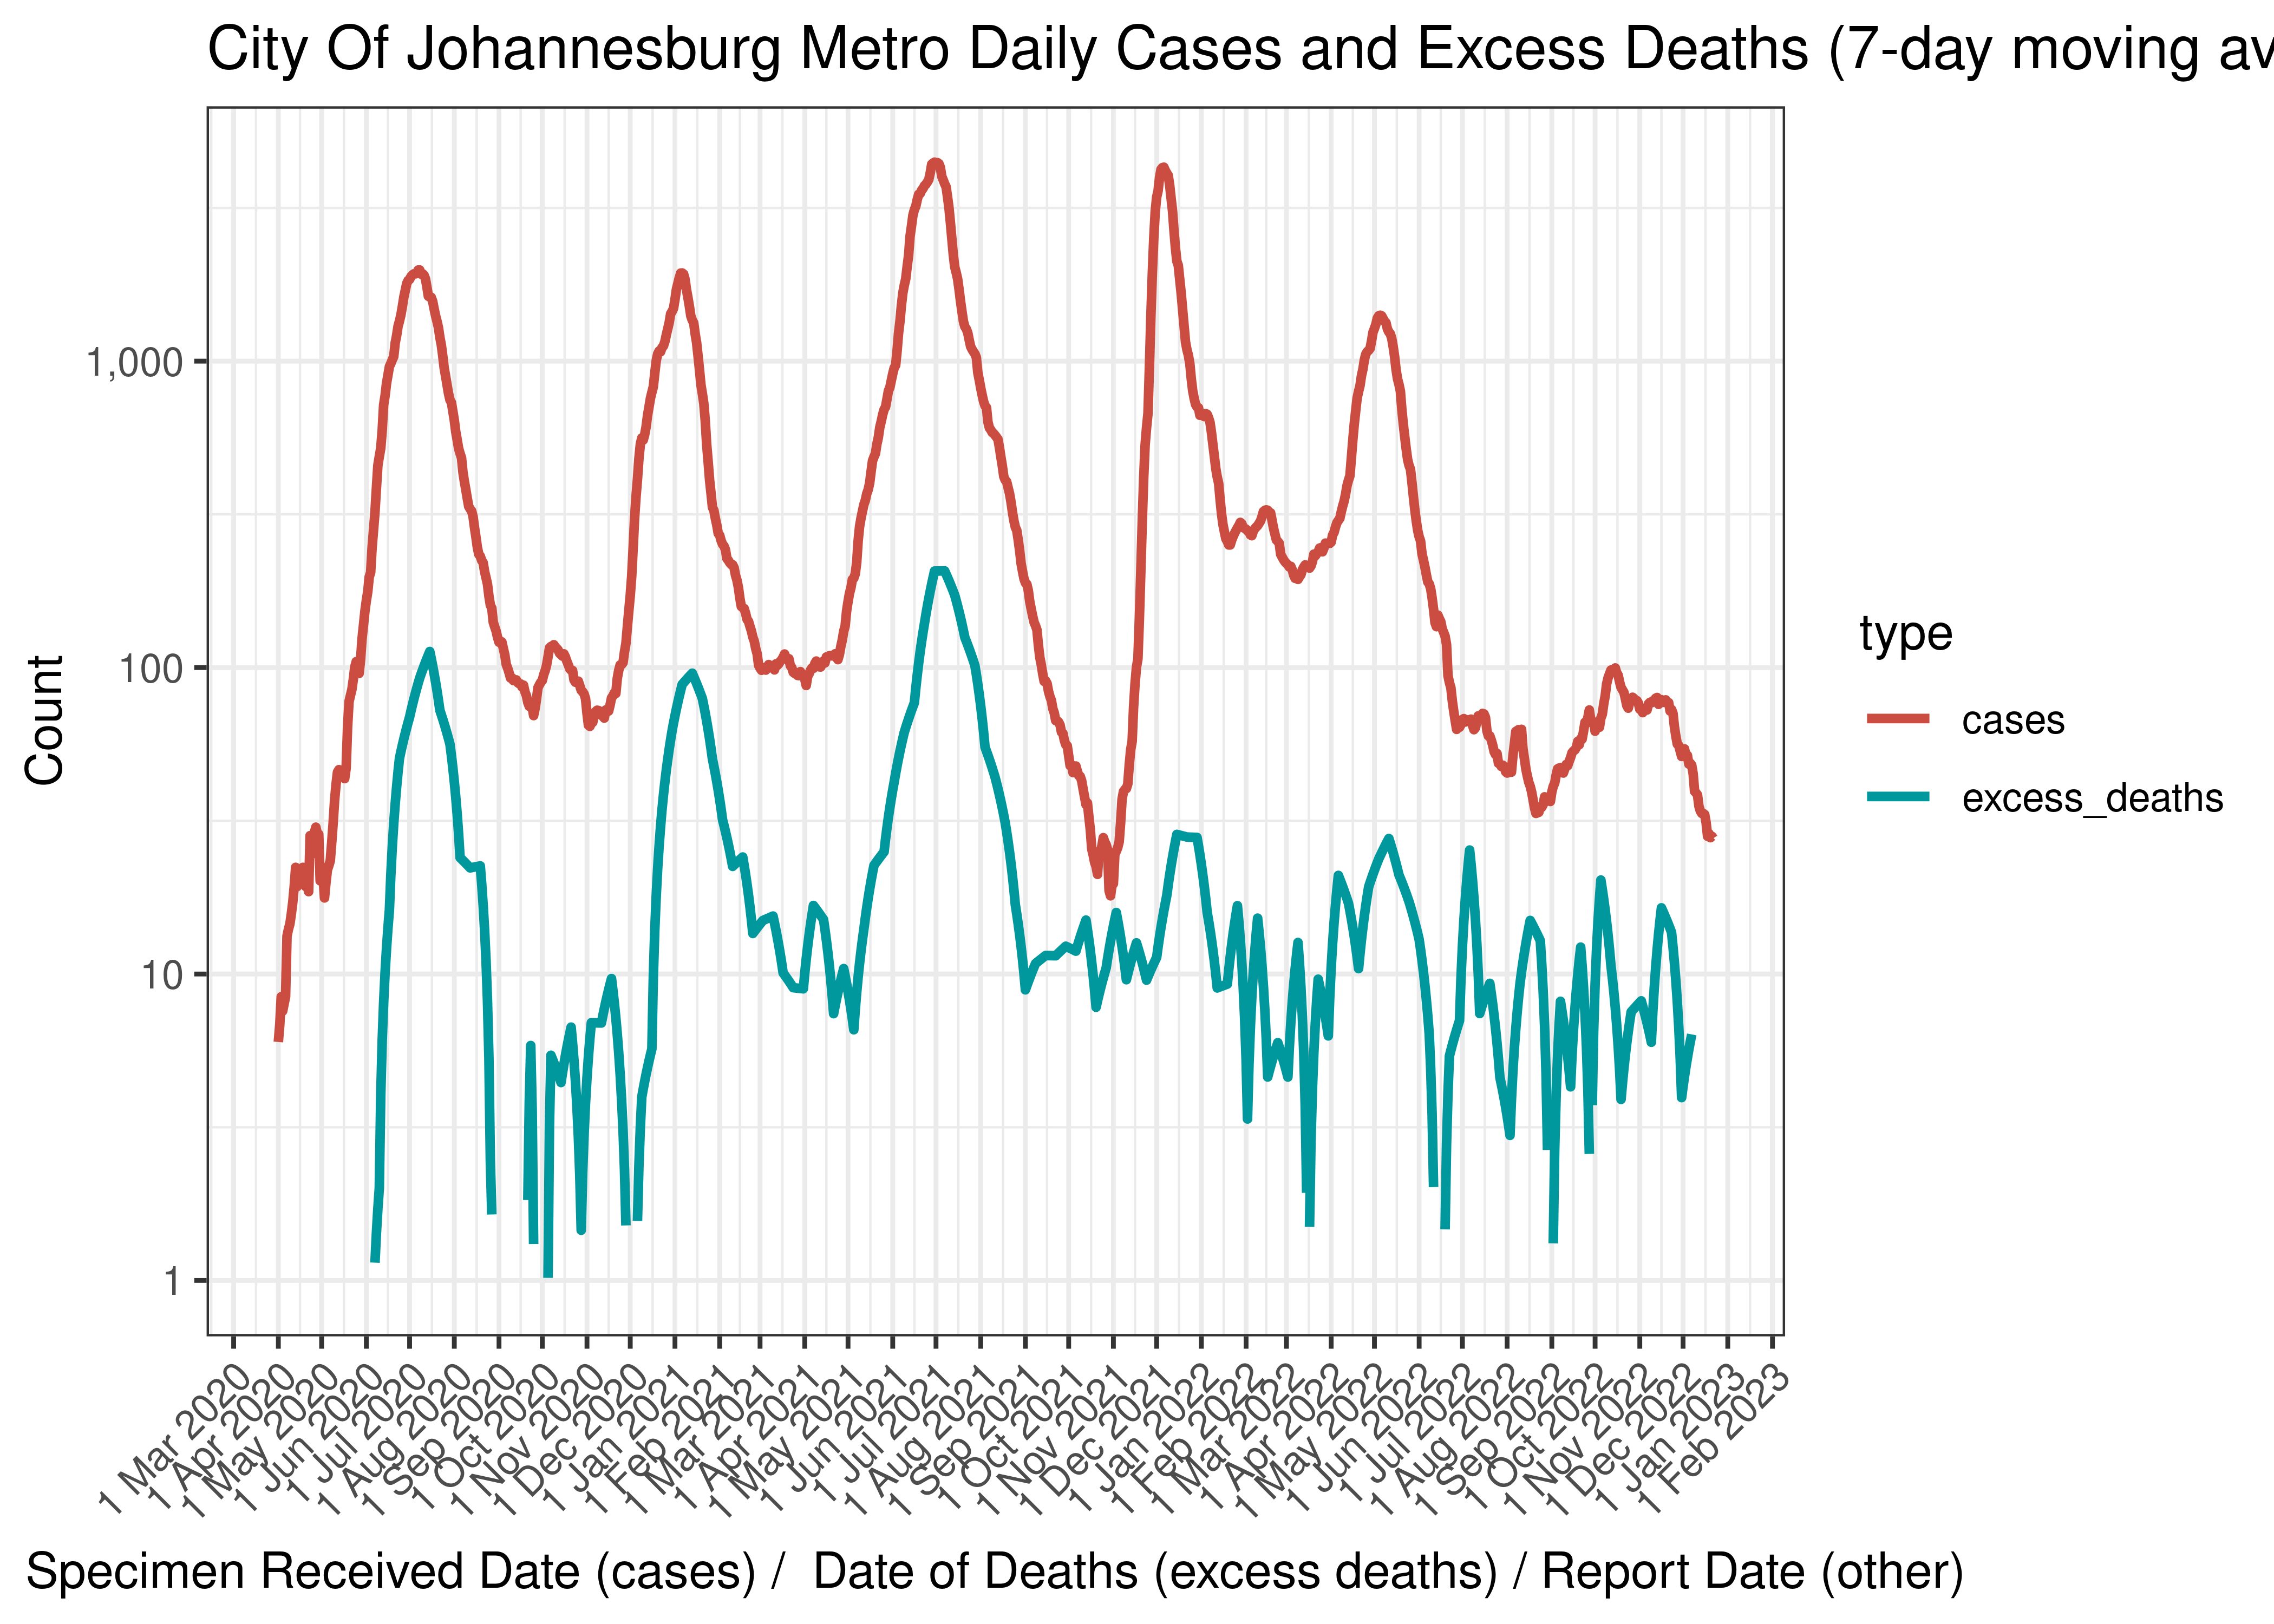 City Of Johannesburg Metro Daily Cases and Excess Deaths (7-day moving average)